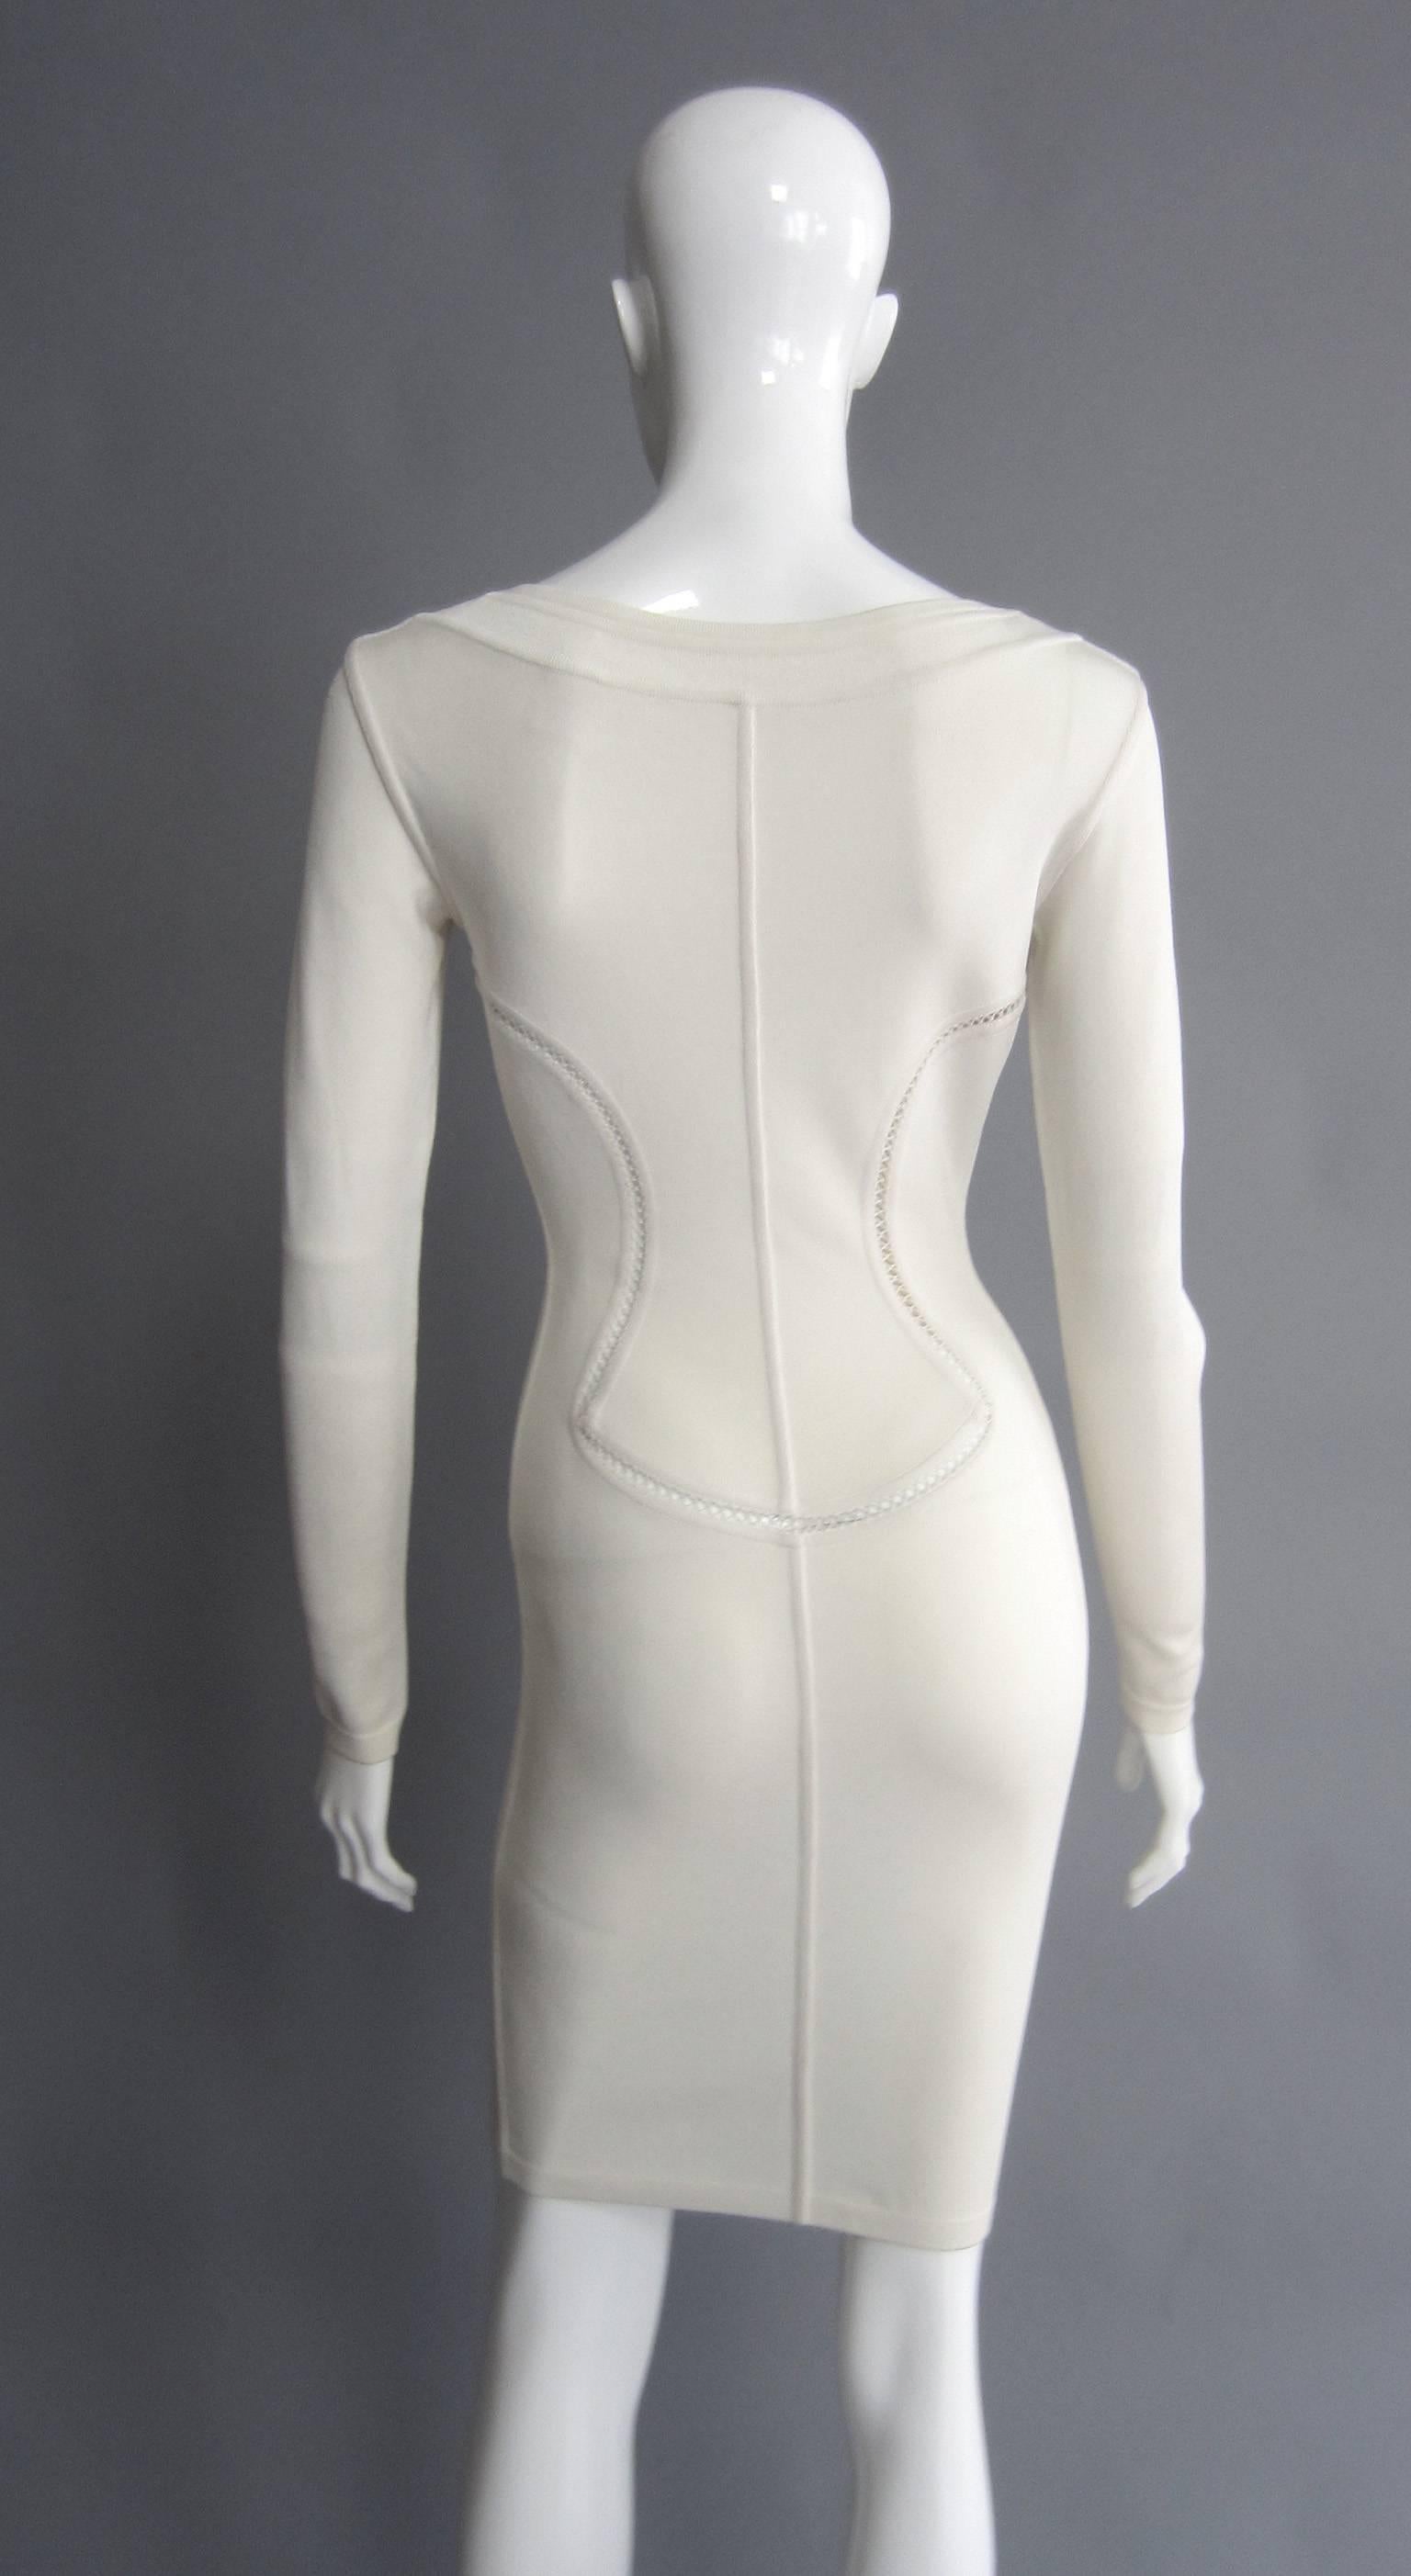 Classic 1990s ALAIA fitted Dress featuring lattice detailing, The cut out lines strategically curved to hug the body, with the lattice detail filling the space in between. Long Sleeve. Wide Neck line with ribbed detail.

Fabric Label Reads: 90%